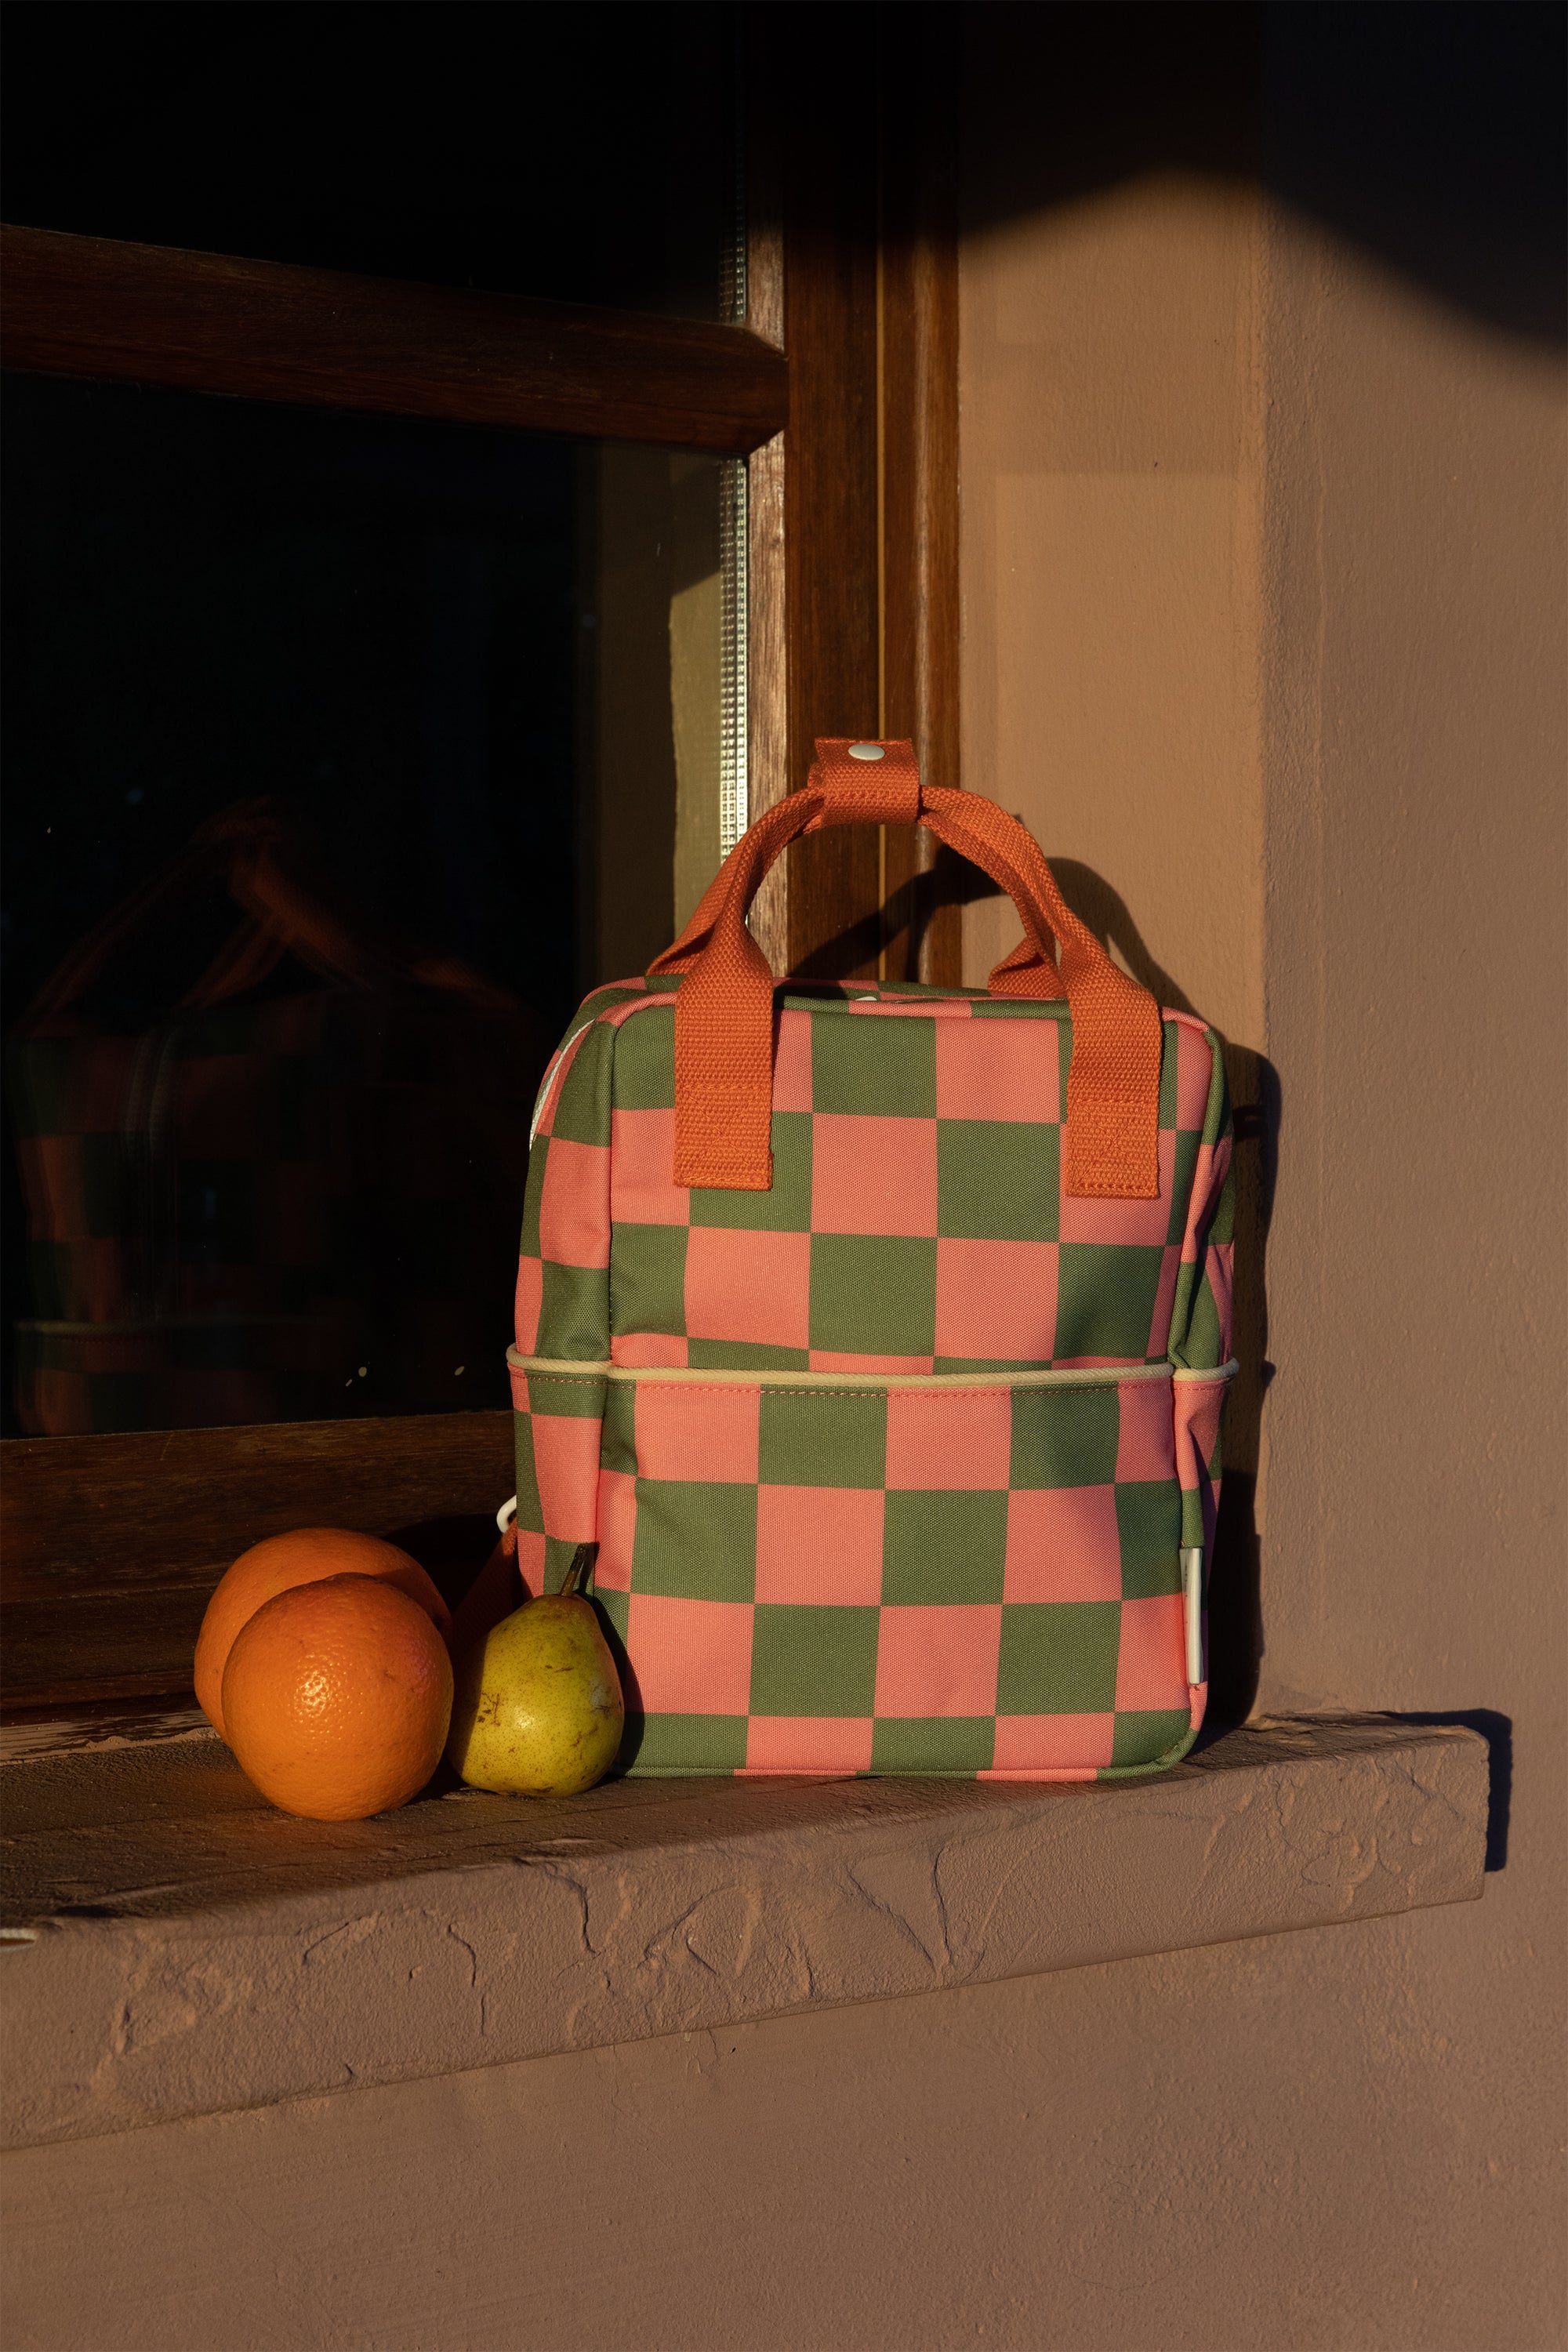 Sac à dos Farmhouse damier - SPROUT GREEN & FLOWER PINK